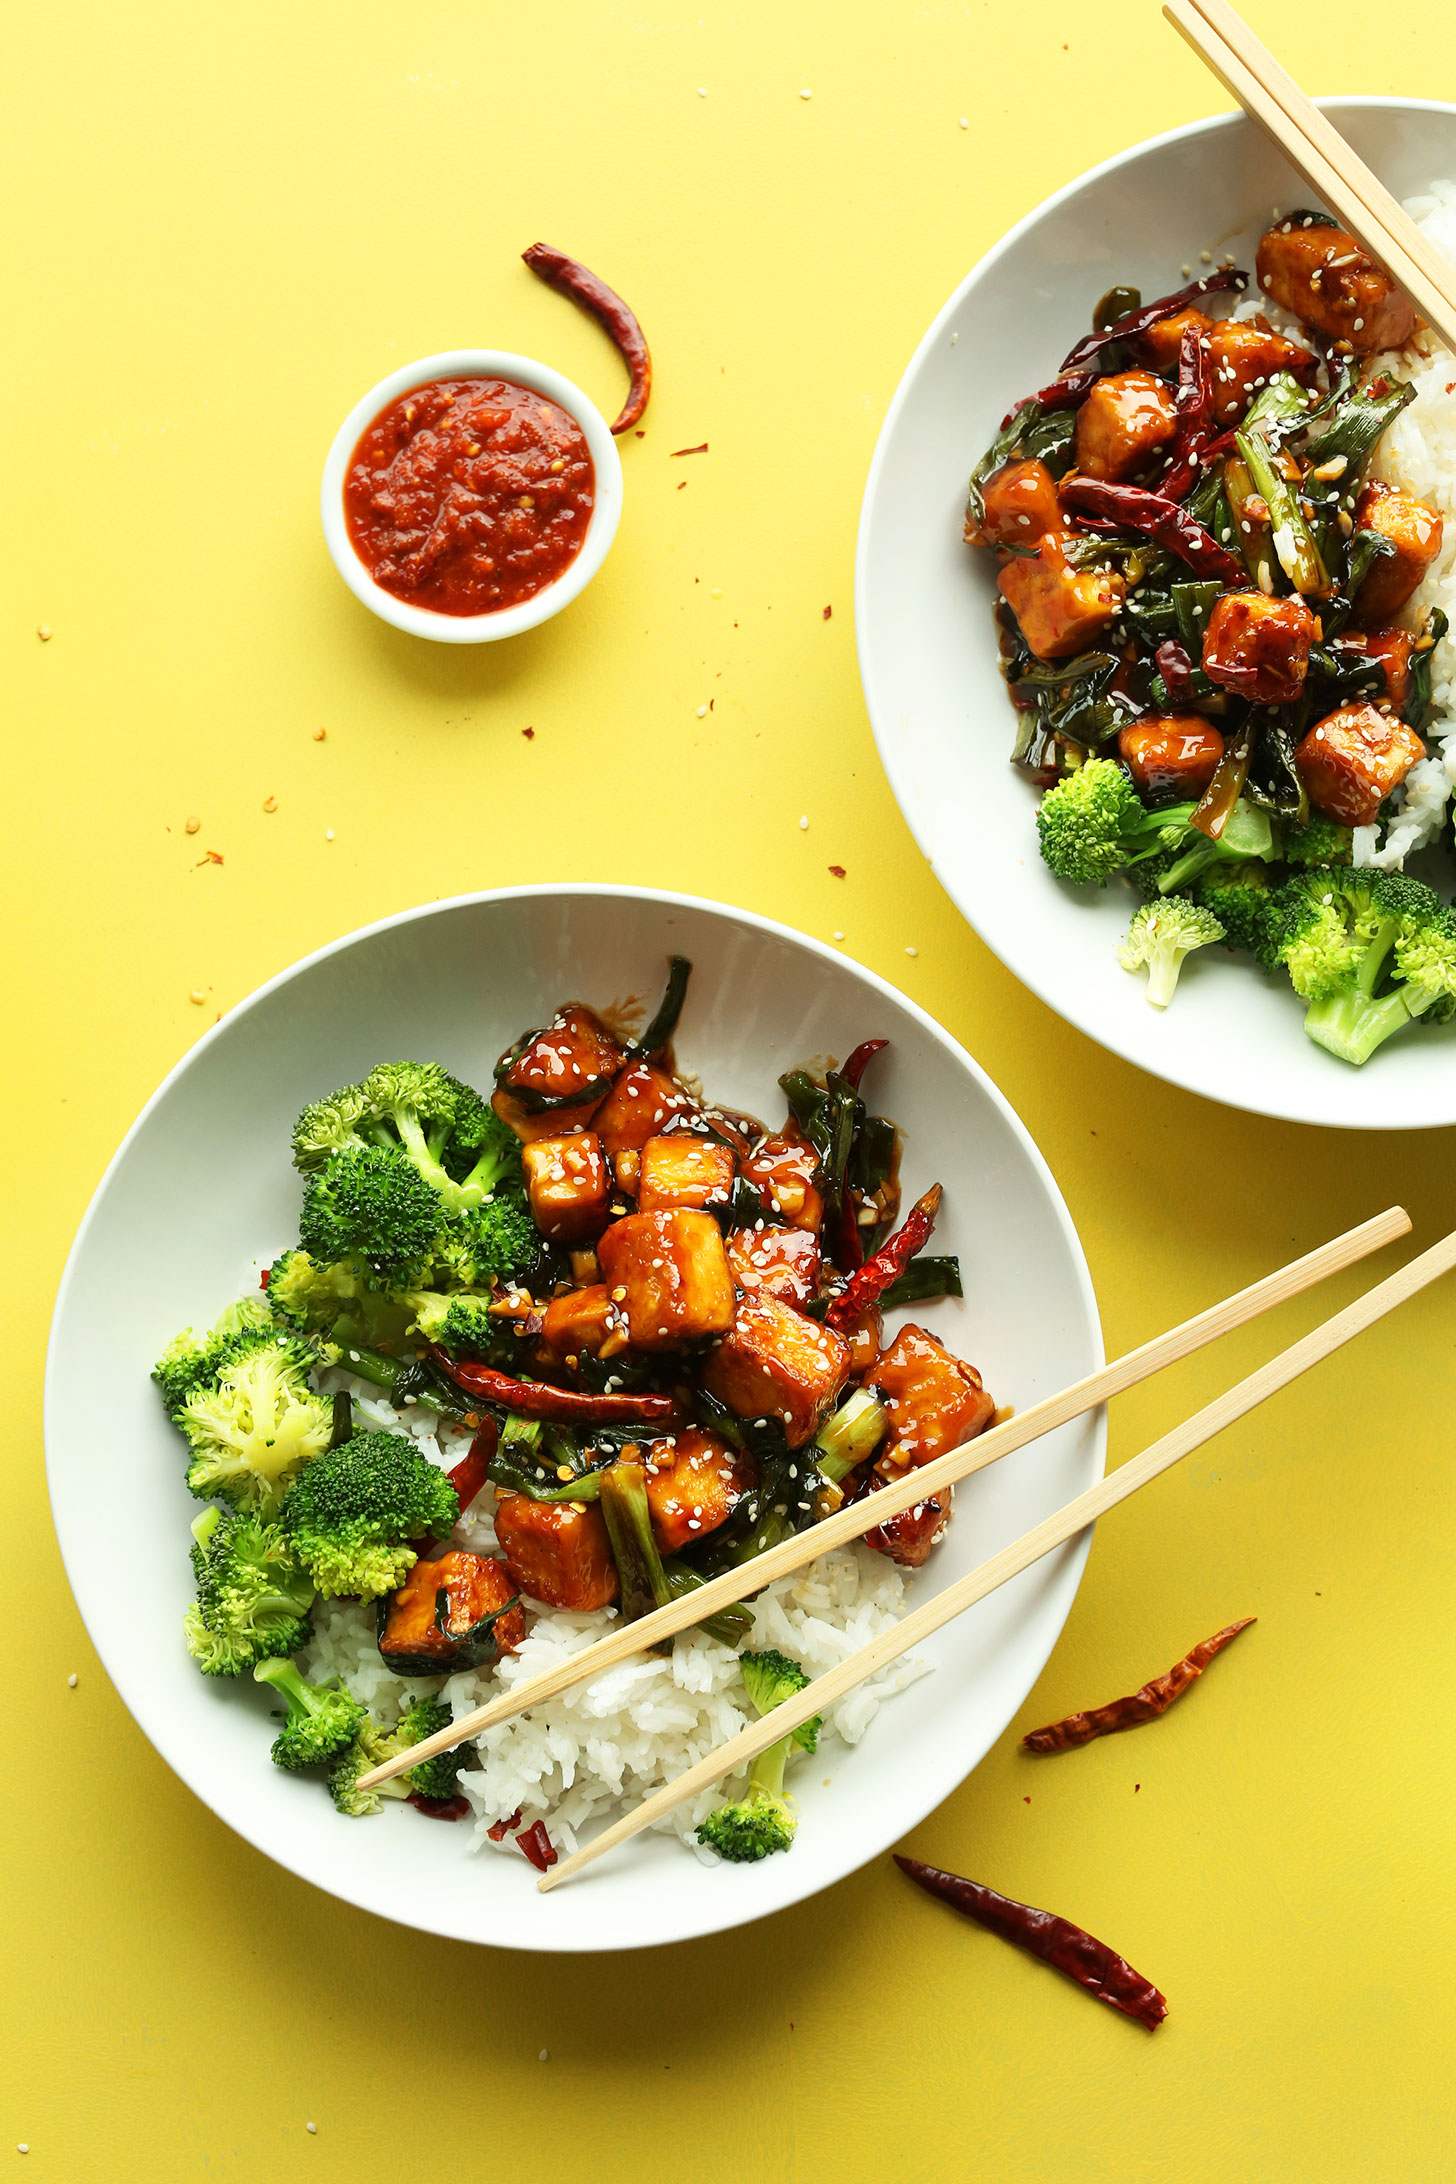 Dinner bowls filled with our General Tso's Tofu recipe alongside broccoli and rice